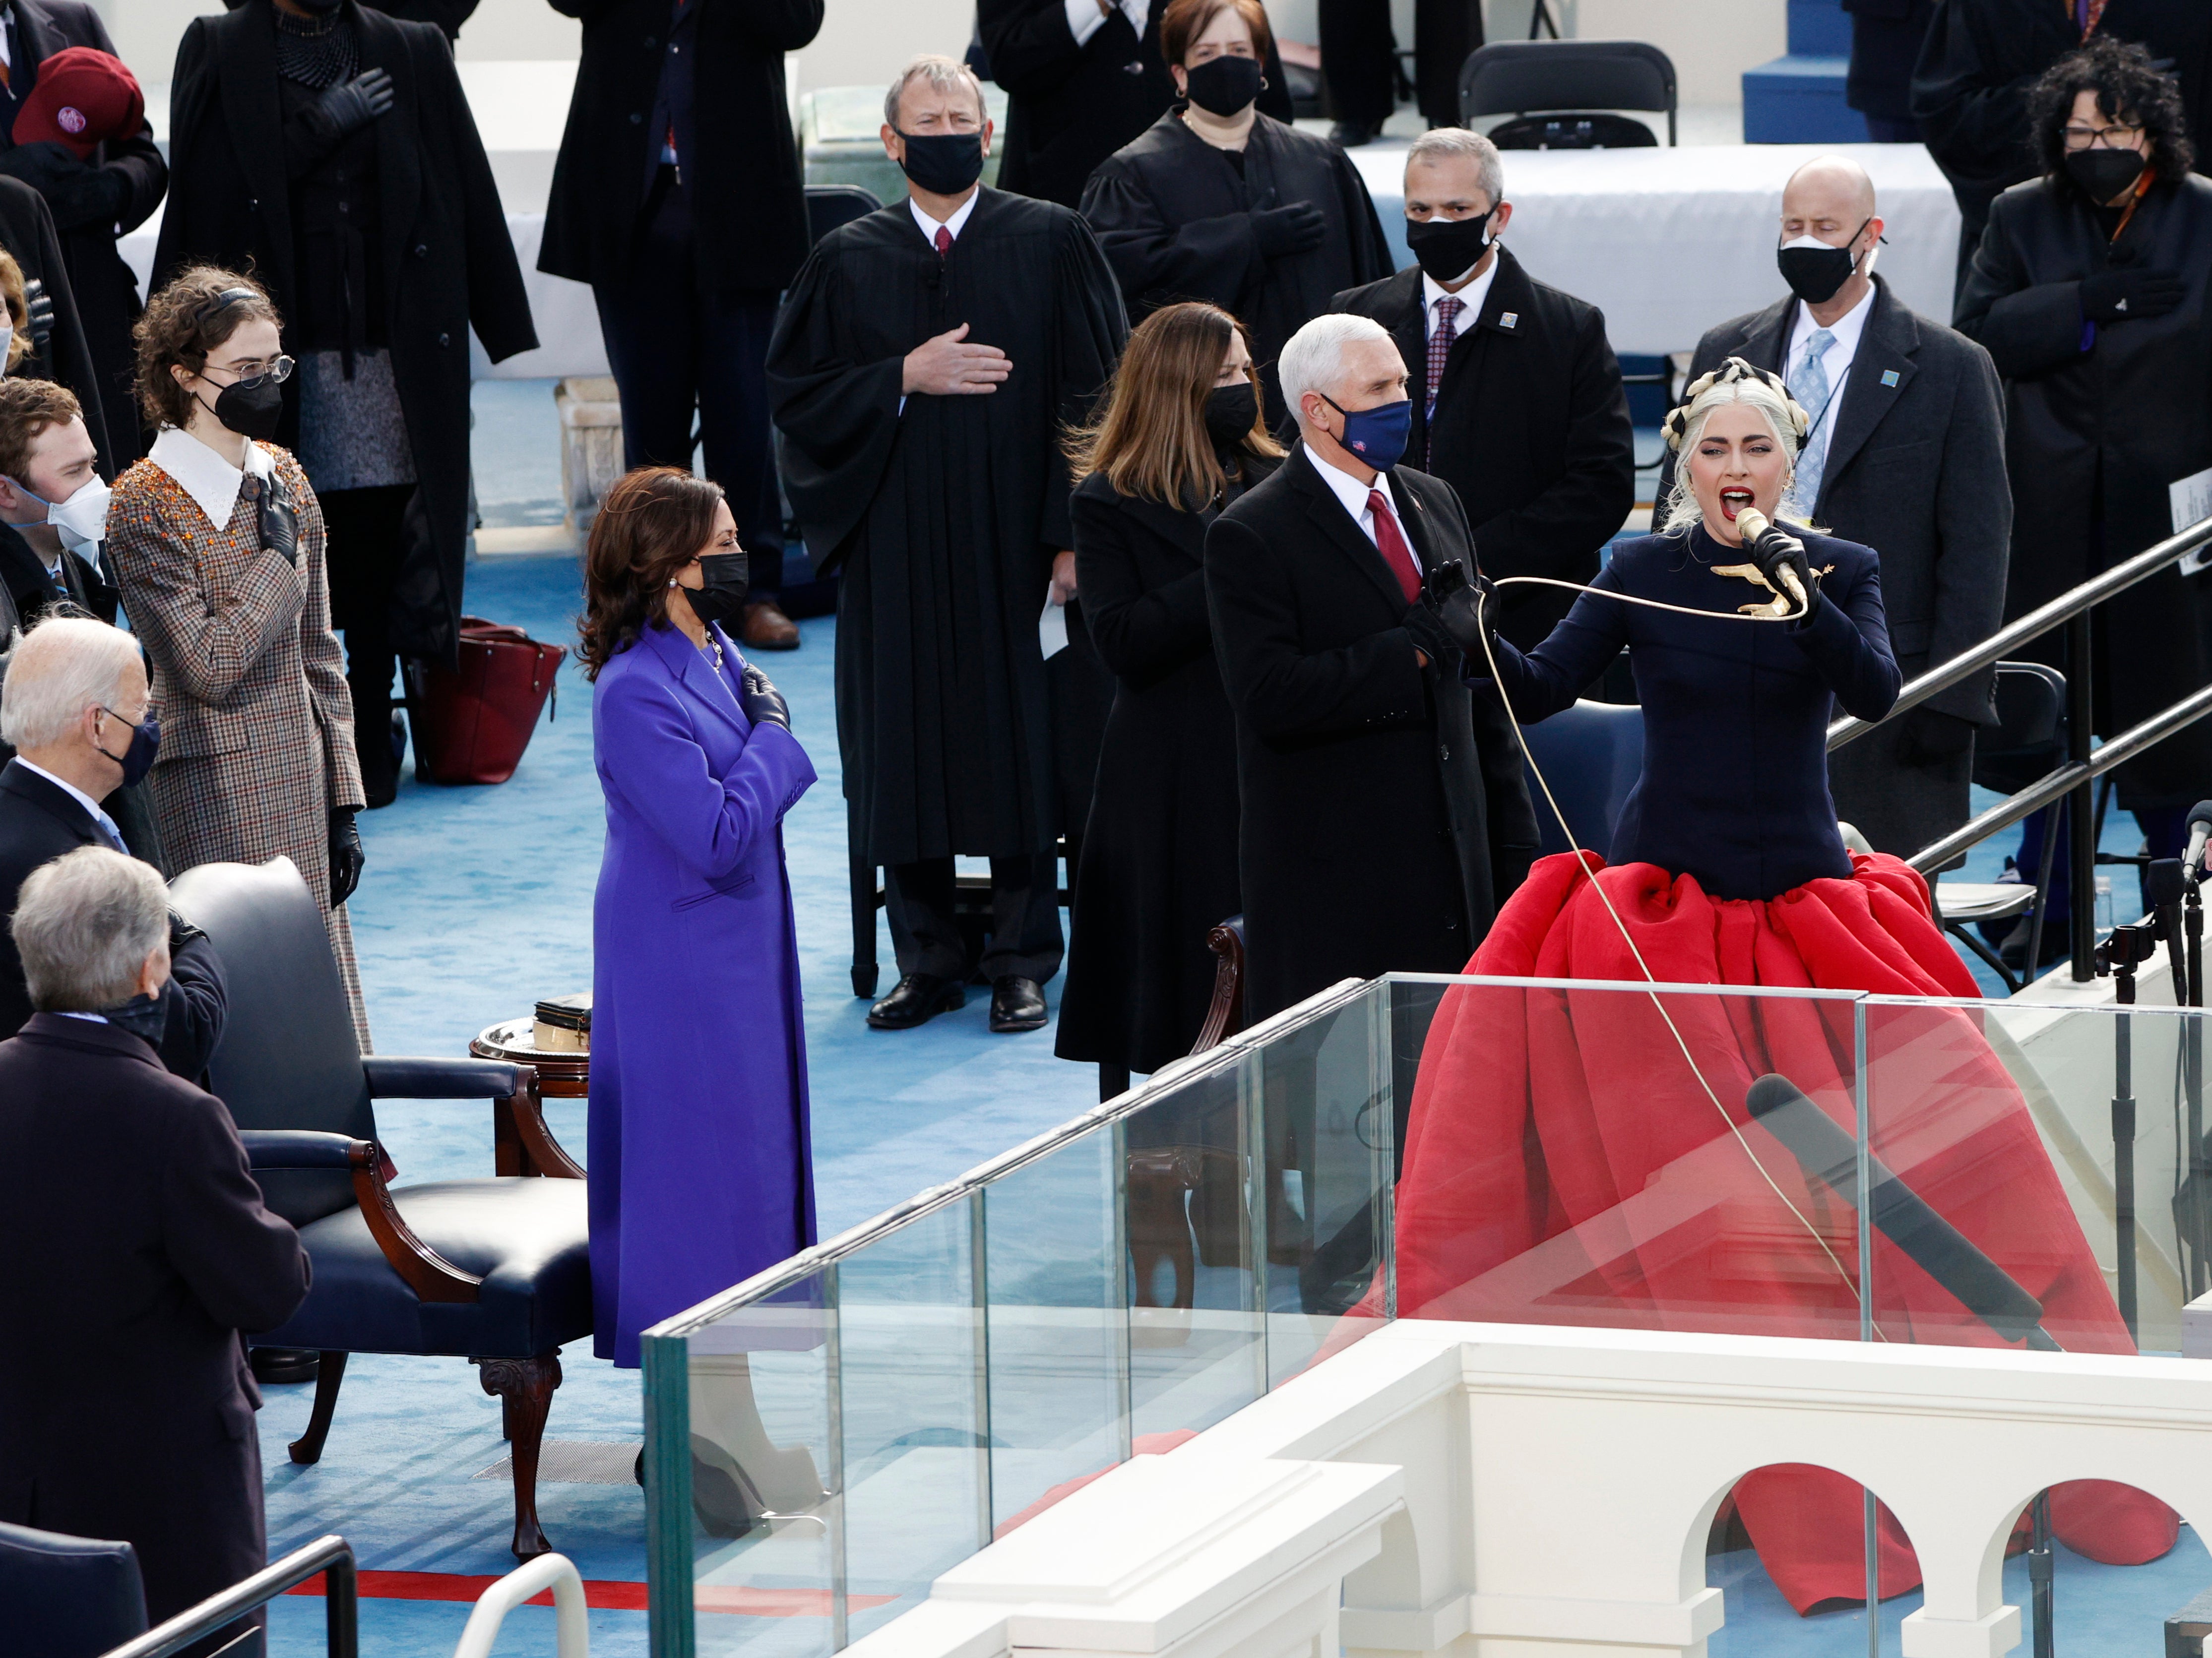 Lady Gaga sings the National Anthem during the inauguration ceremony on the West Front of the Capitol. Ahead of the inauguration on 19 January, Gaga said she hoped the ceremony would be ‘a day of peace for all Americans.’